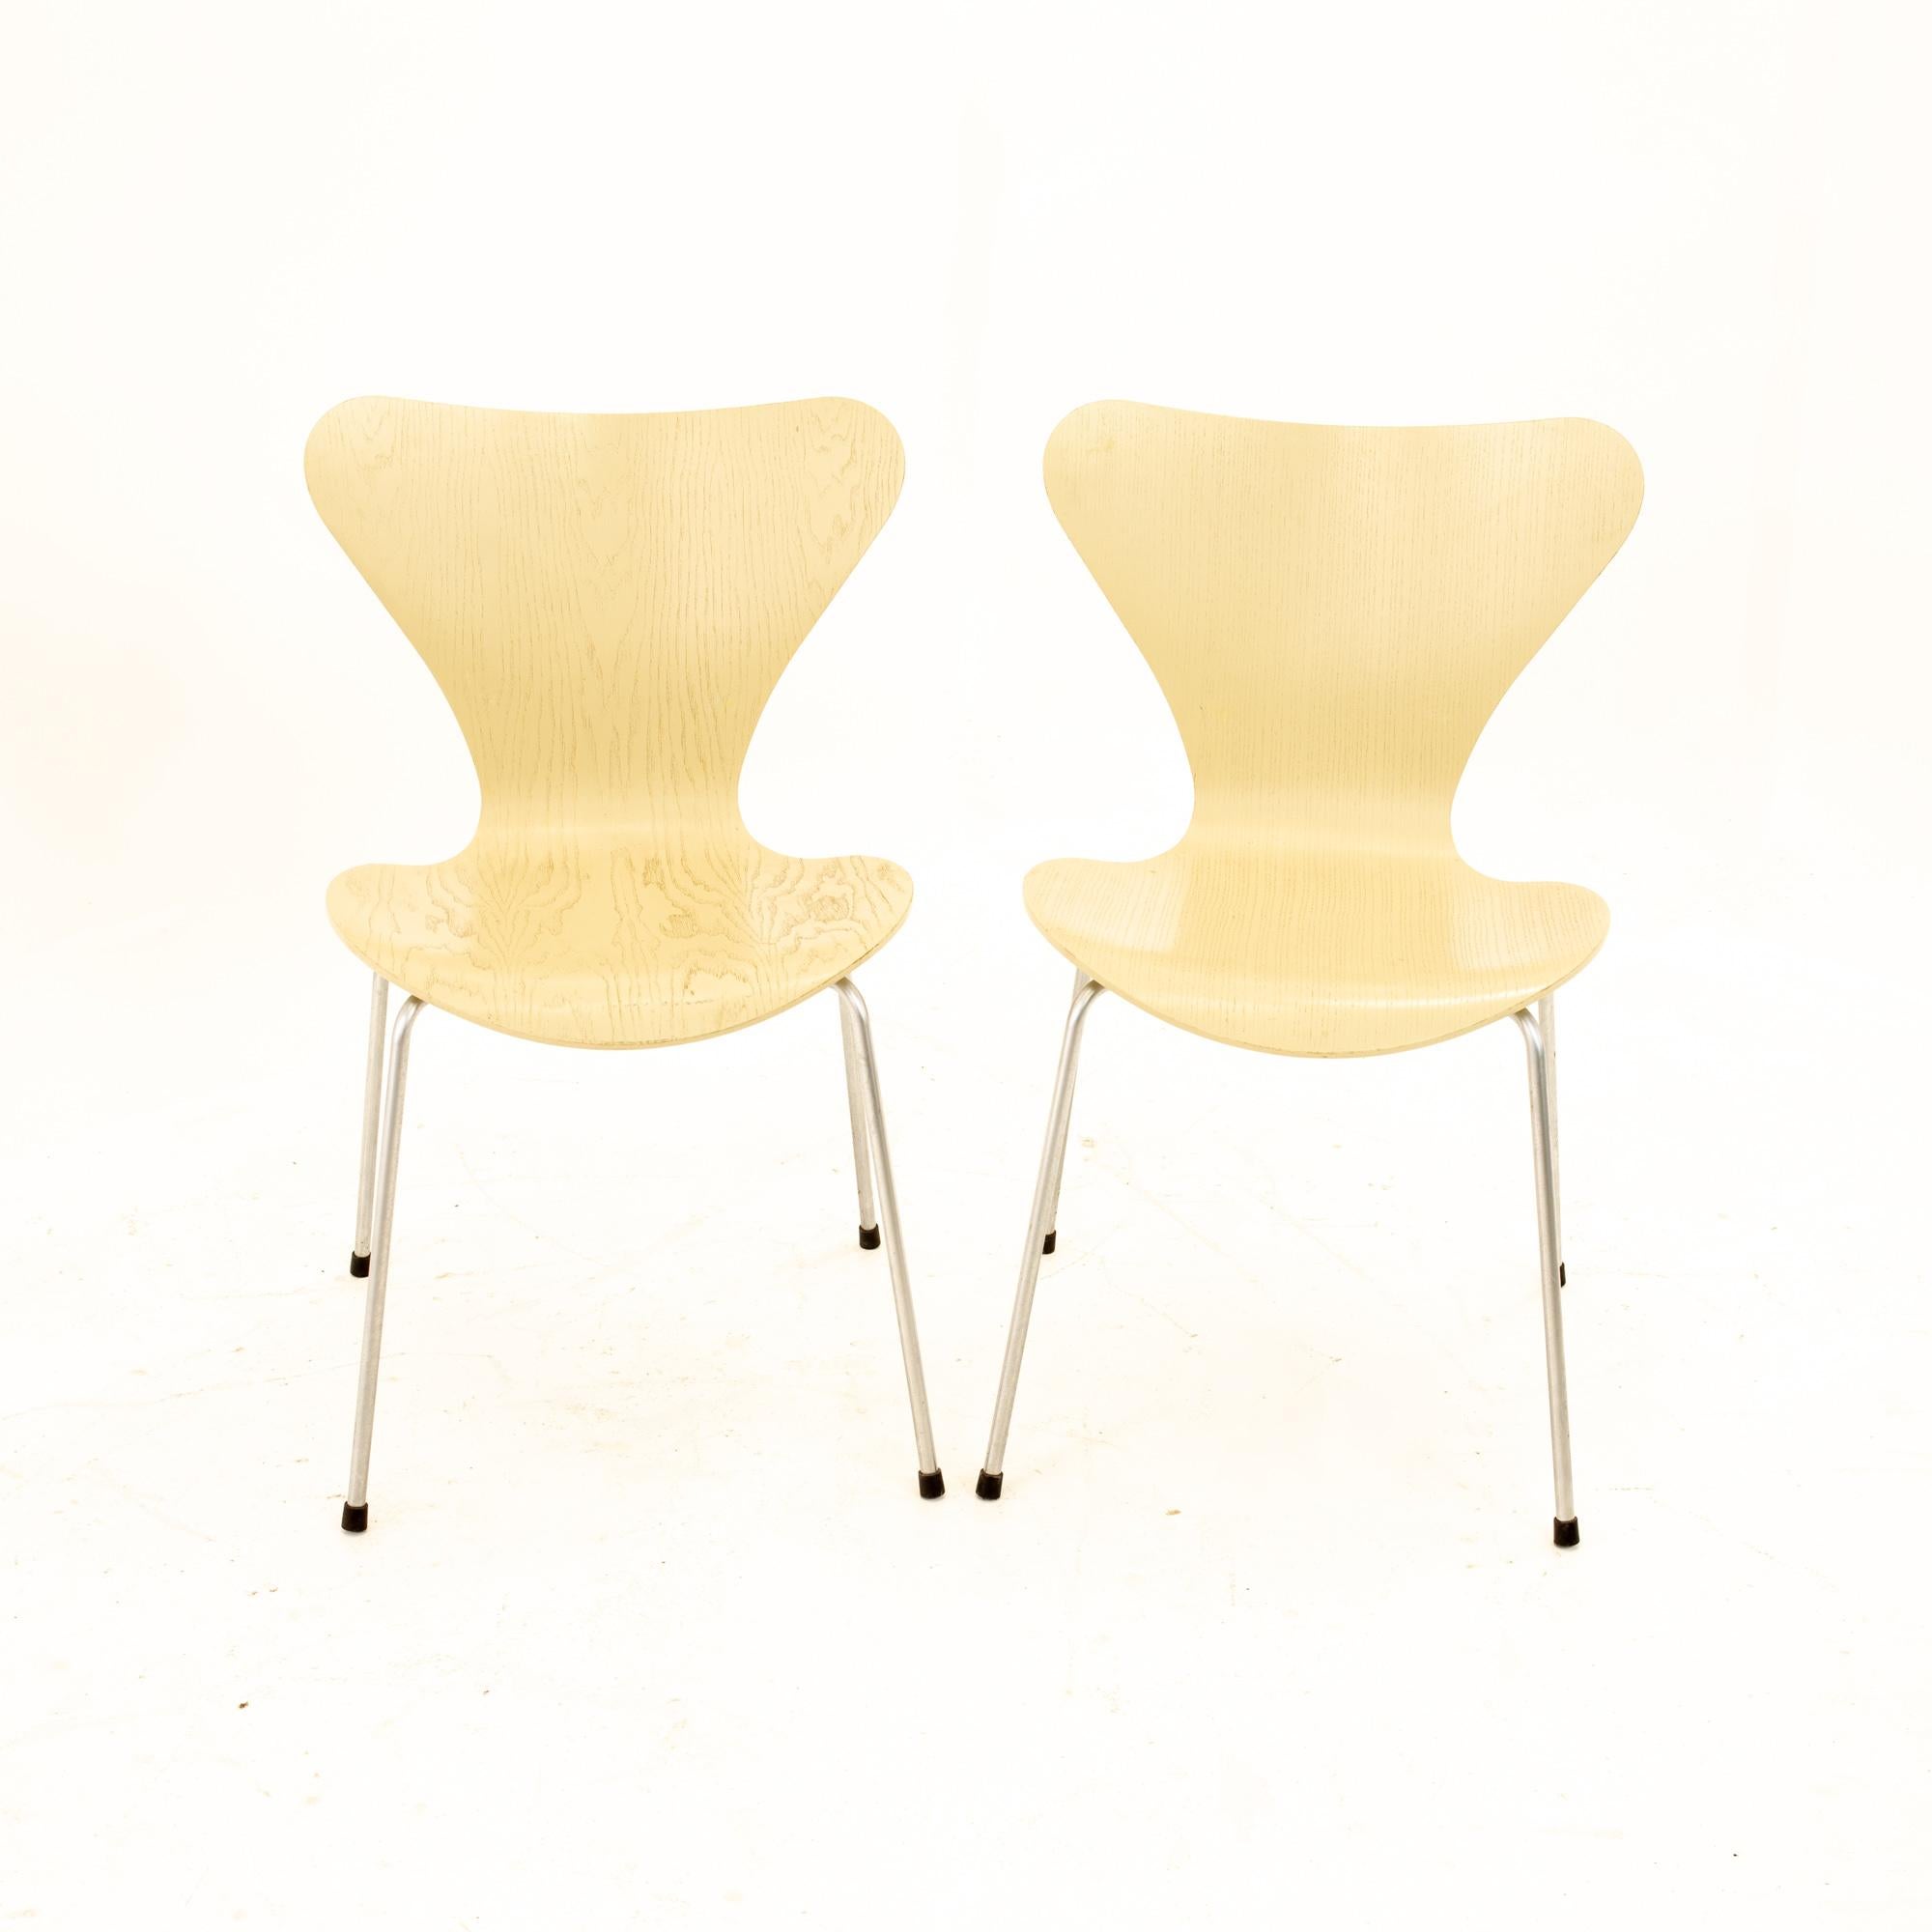 Arne Jacobsen for Fritz Hansen Mid-Century Modern Series 7 chair - Set of 2
Each chair measures: 19.5 wide x 19.25 deep x 31 high with a seat height of 17.75 inches

All pieces of furniture can be had in what we call restored vintage condition.